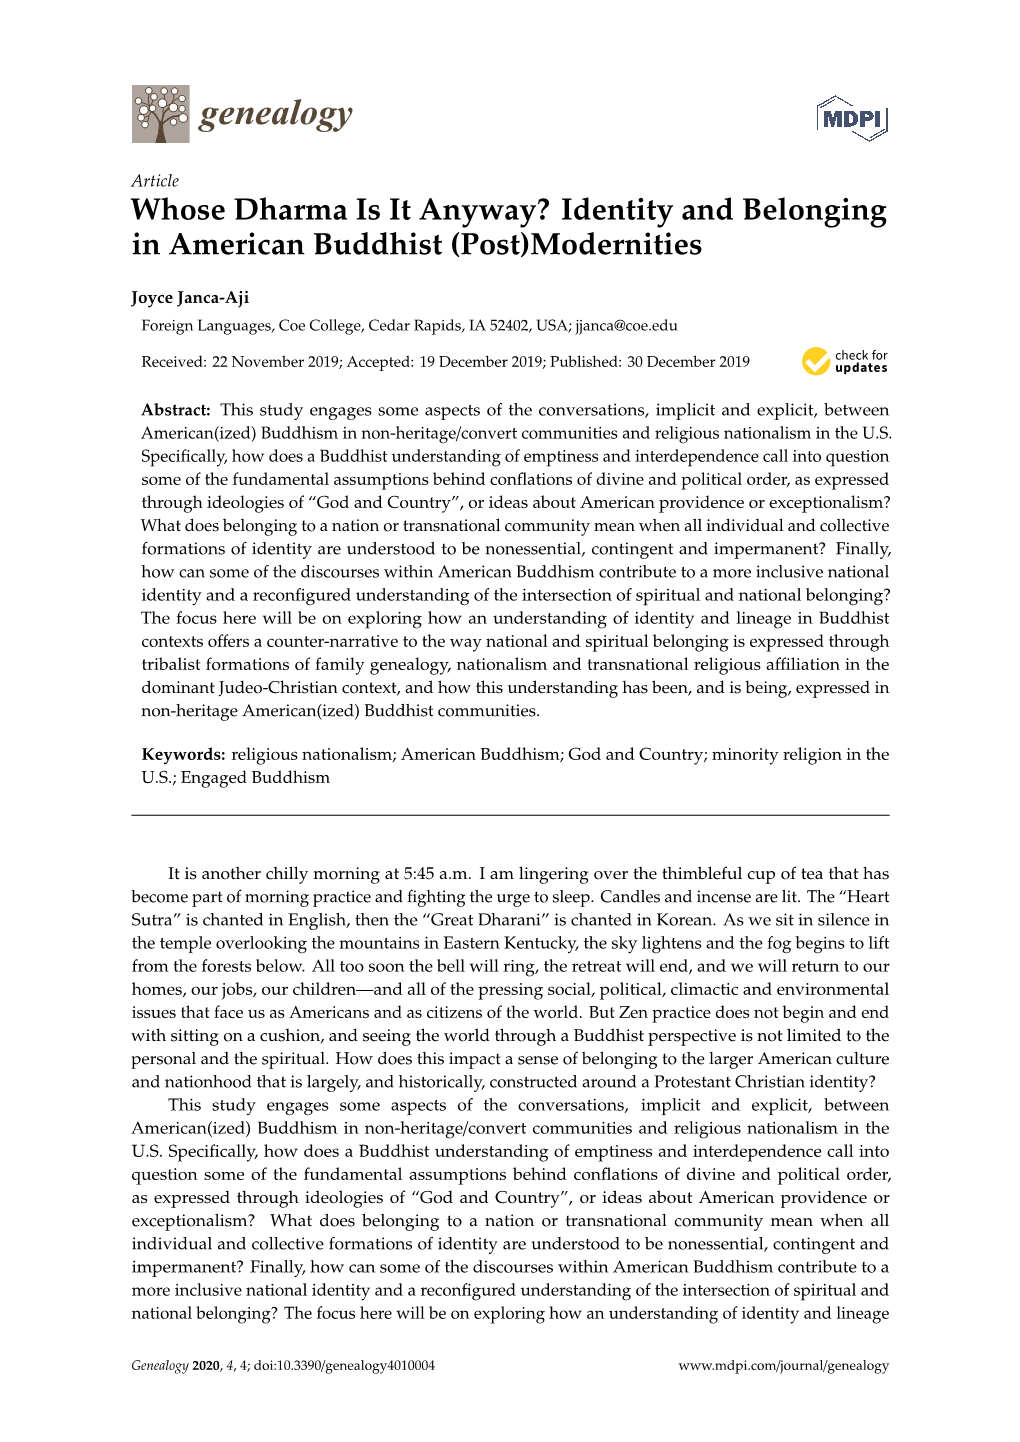 Identity and Belonging in American Buddhist (Post)Modernities